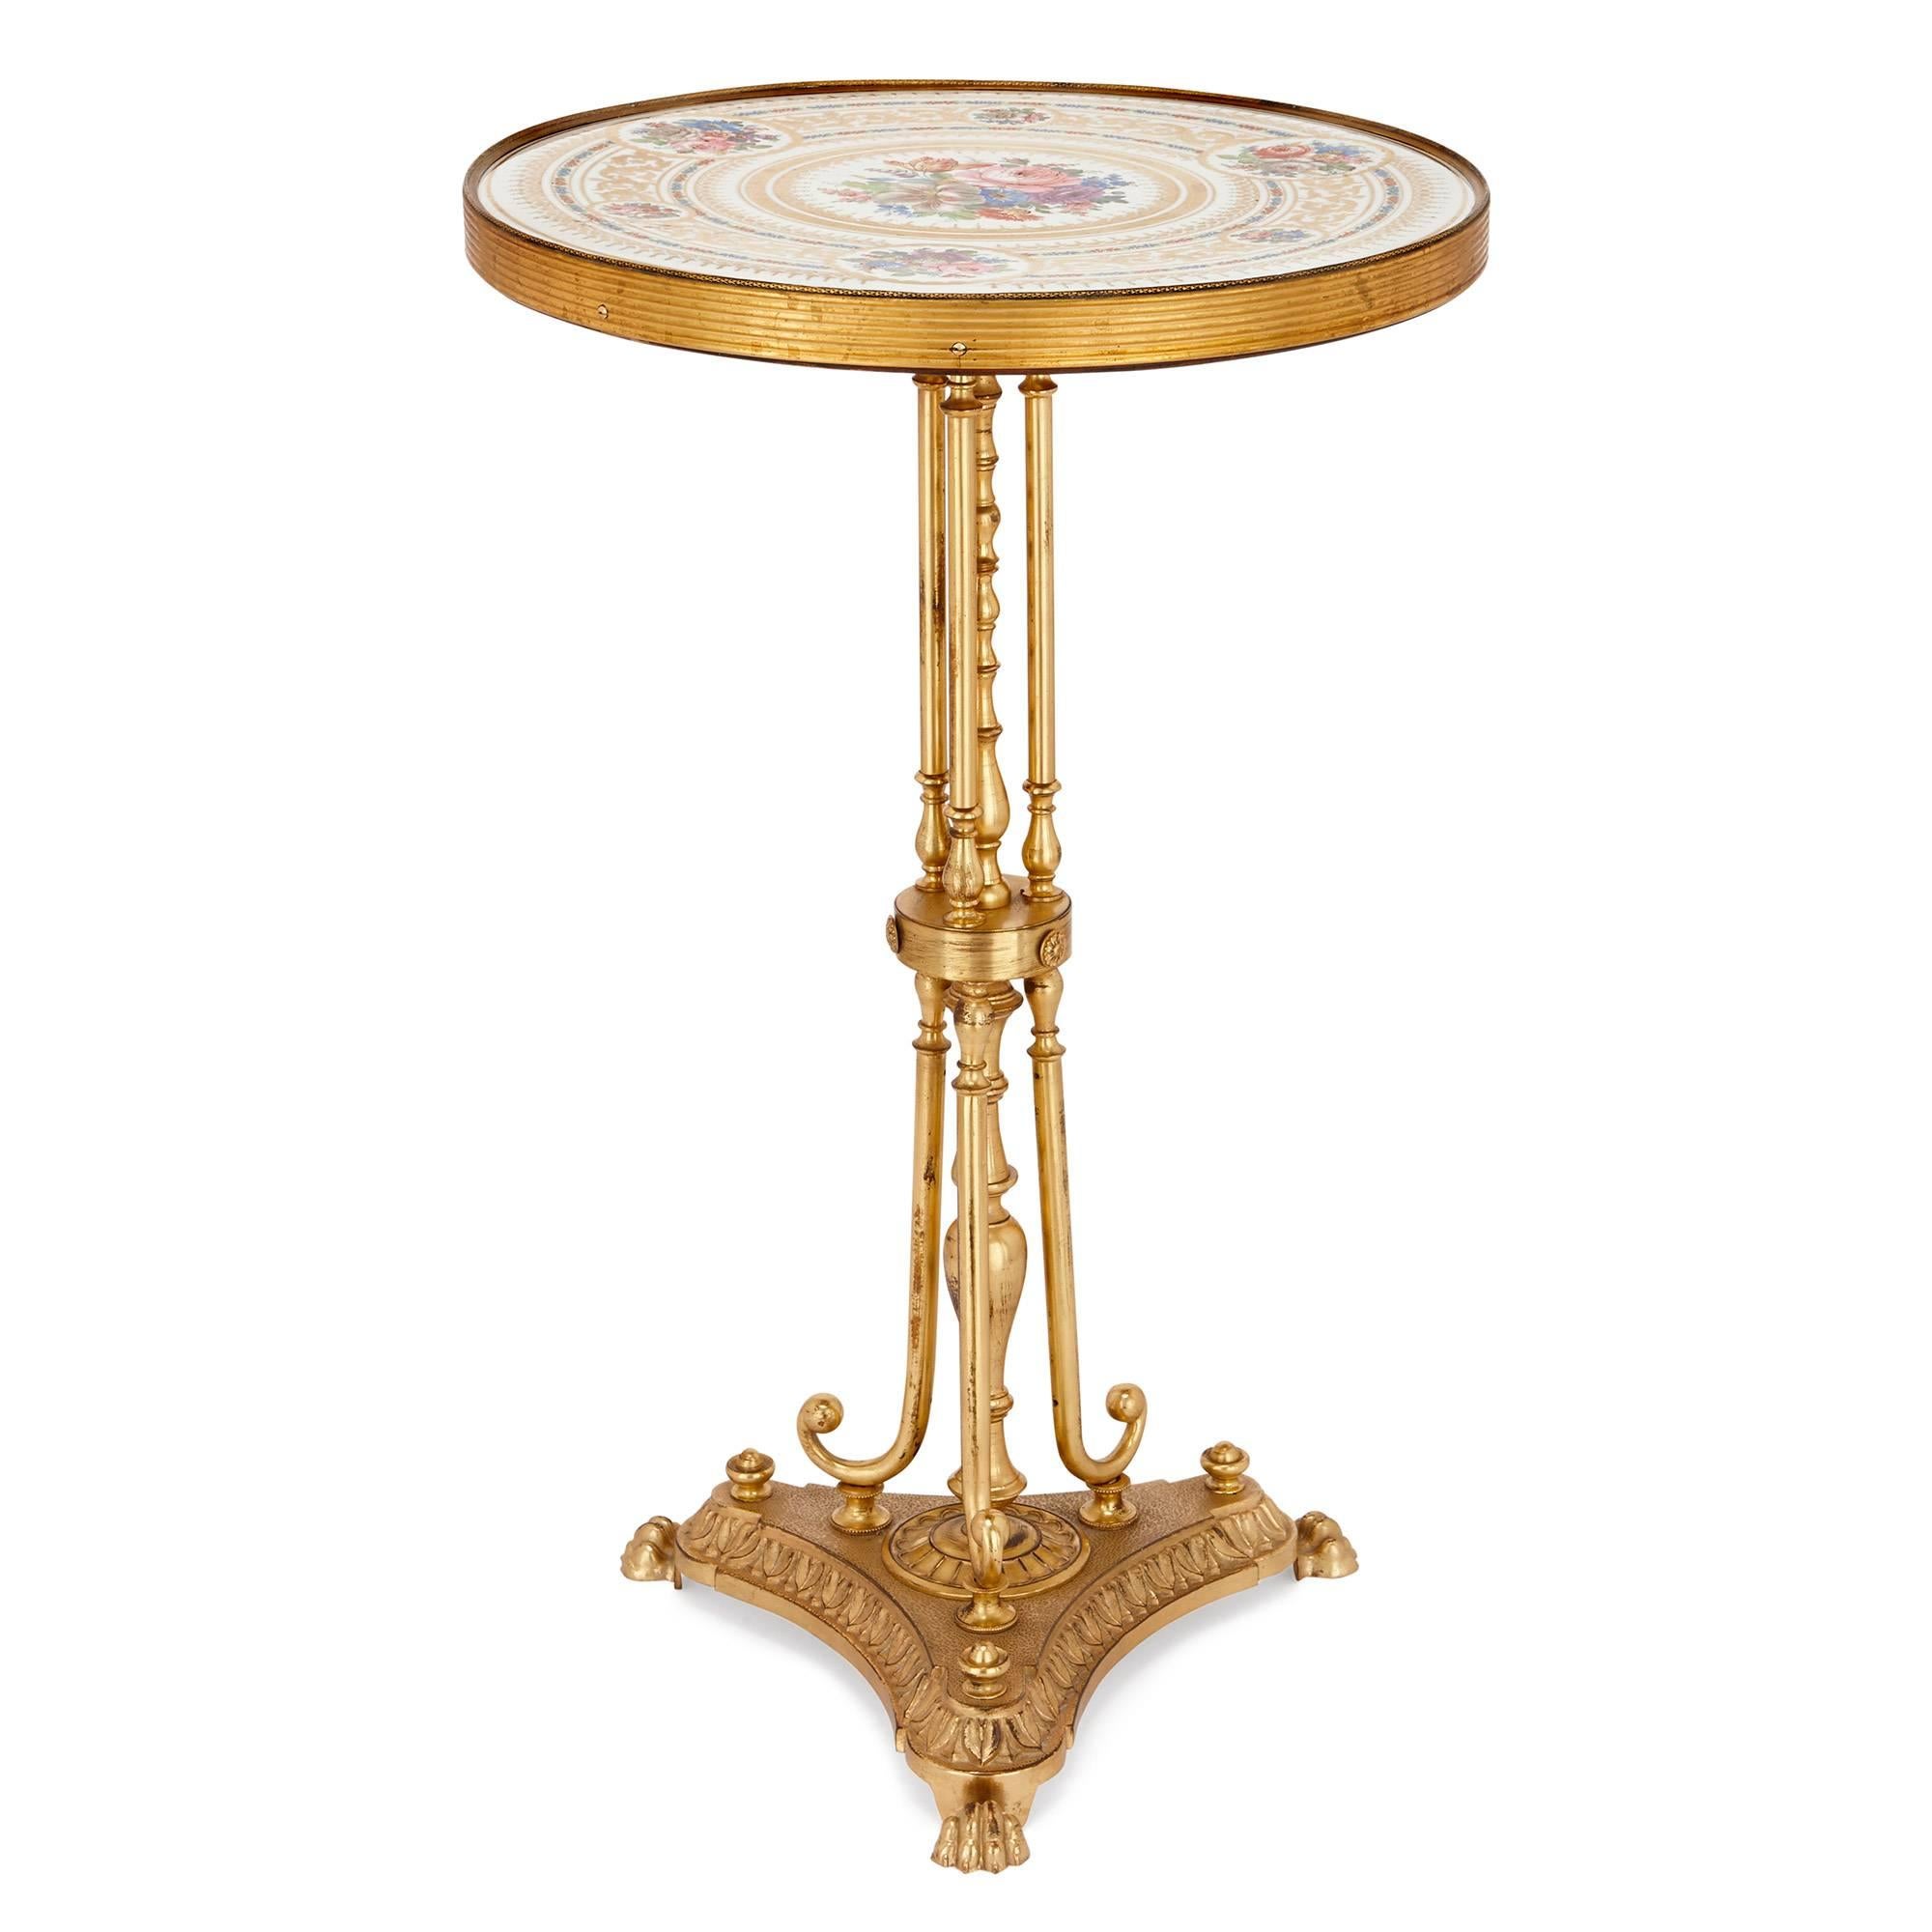 Neoclassical Antique Porcelain and Ormolu Gueridon Table For Sale